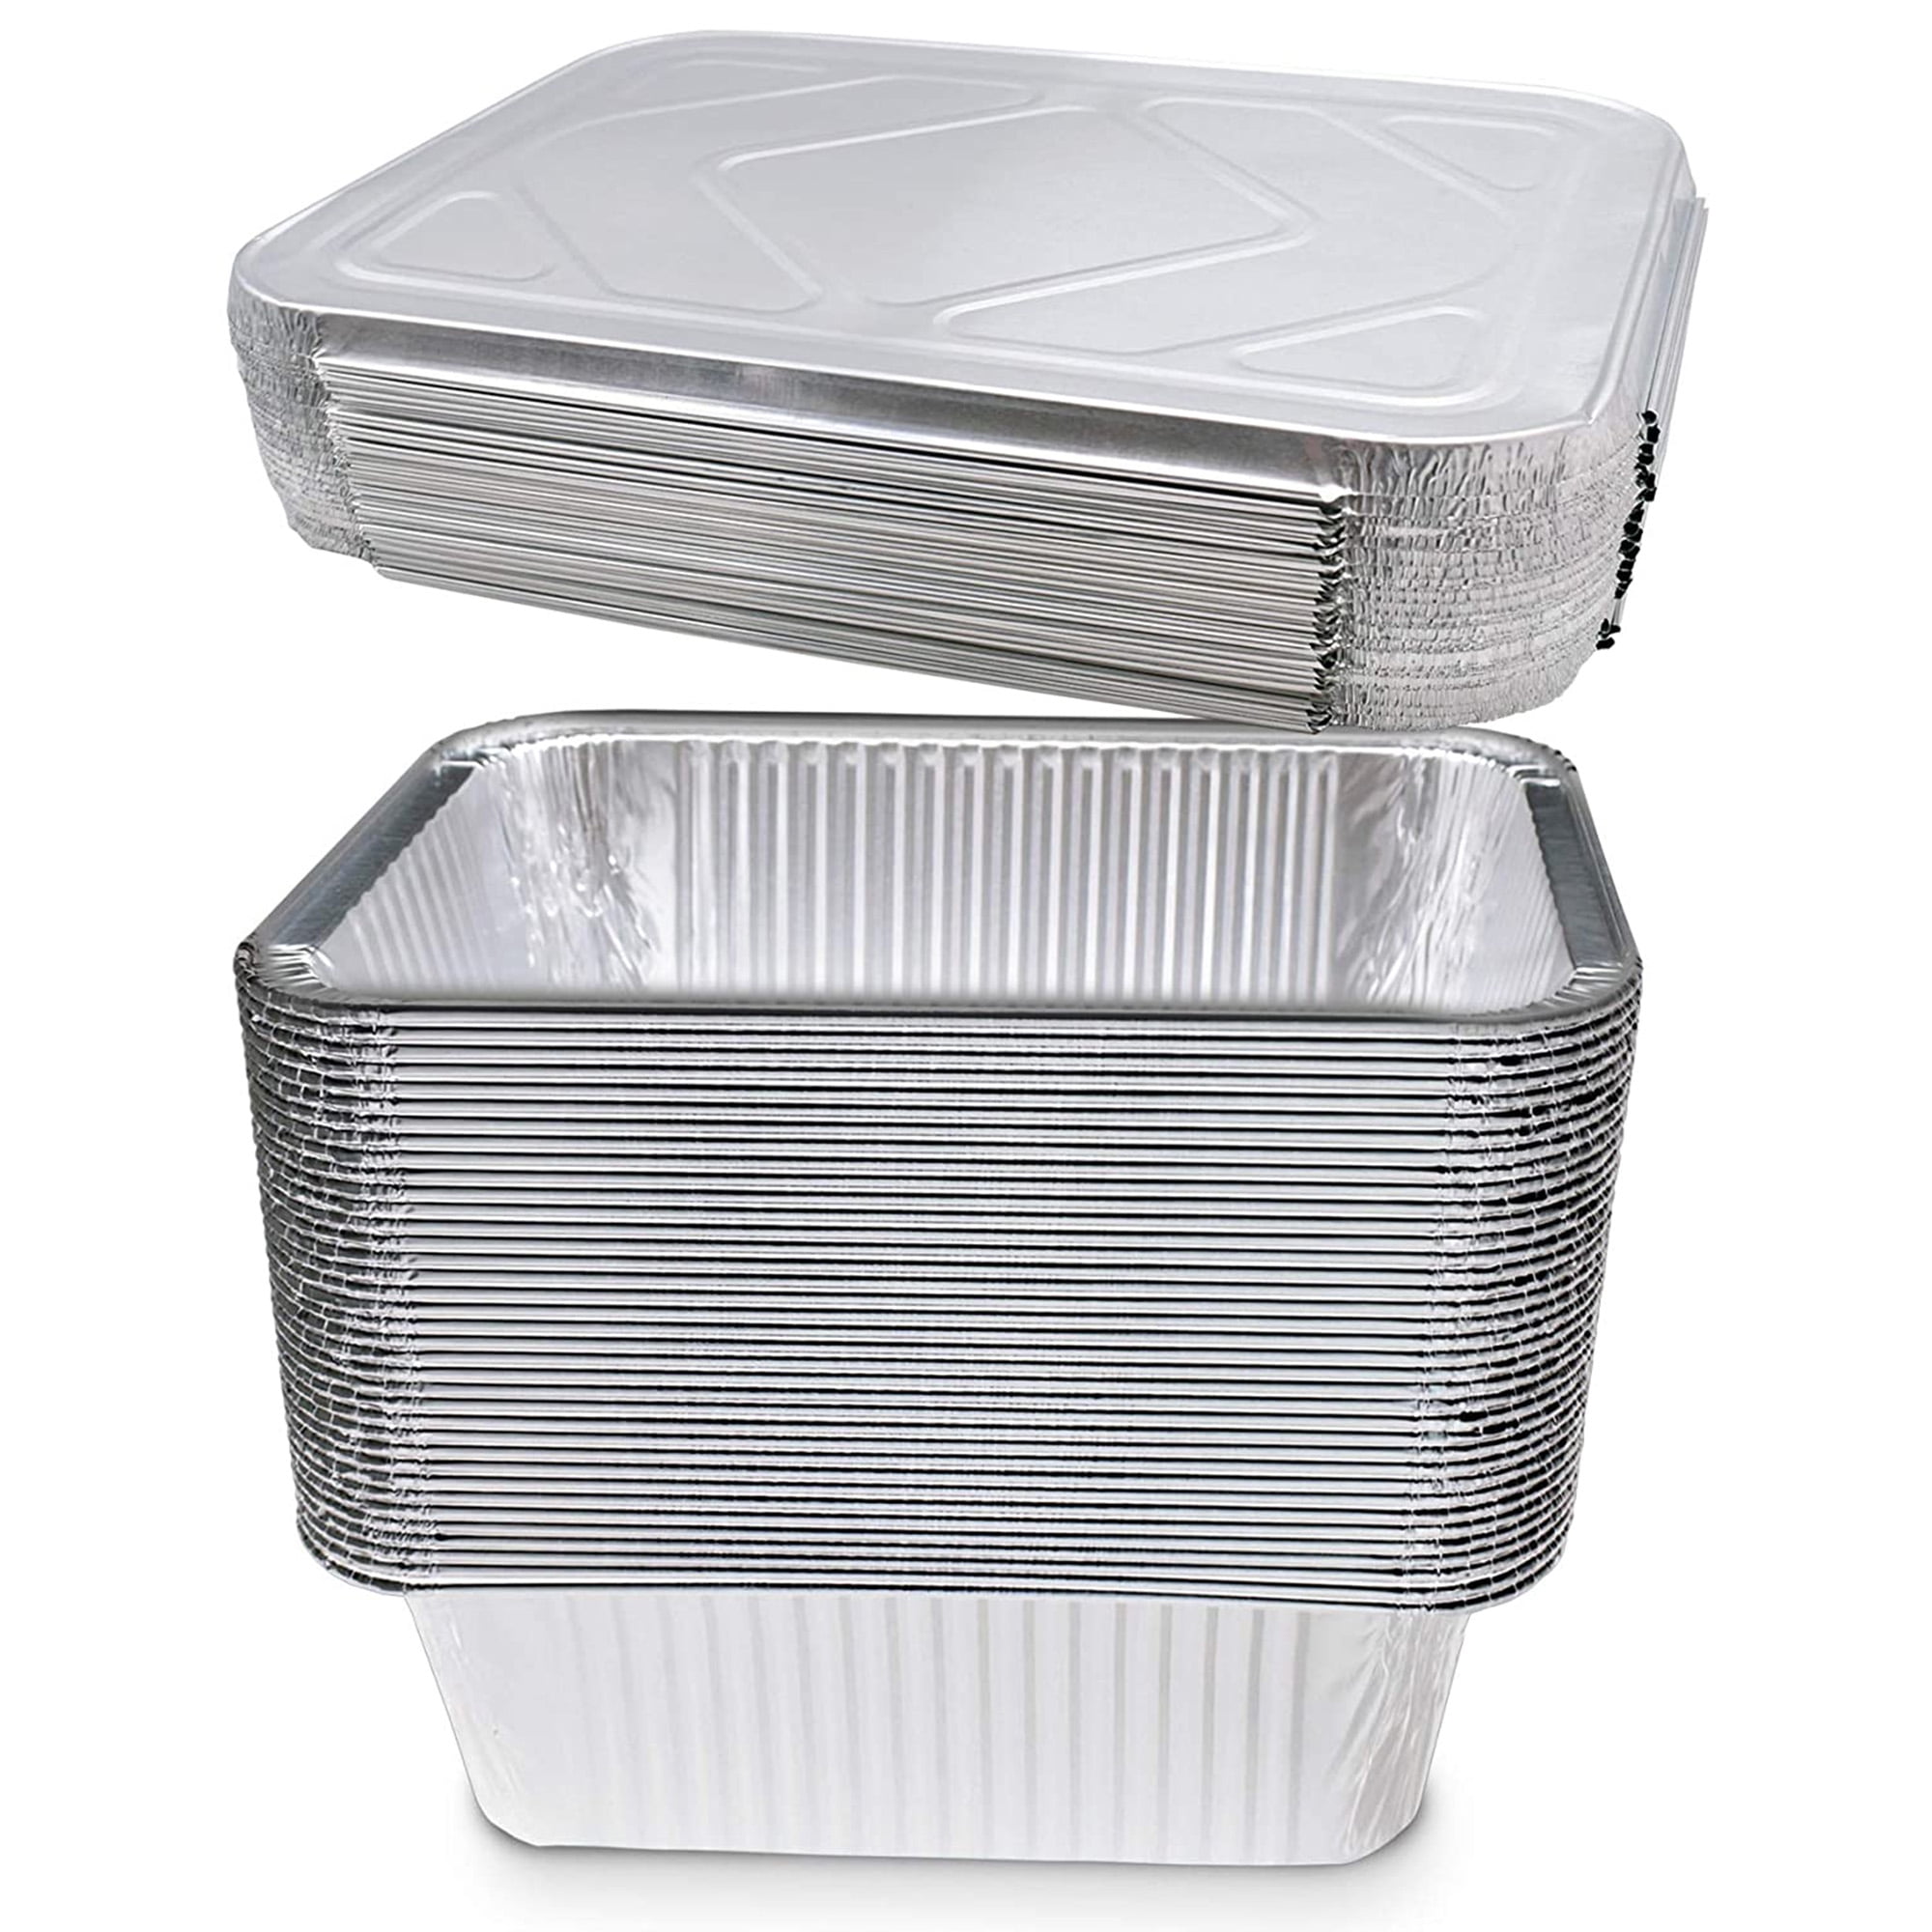 AIDUZETY Heavy Duty 21x13 inch Aluminum Pans with Lids - Pack of 10 Foil Baking Pans for Meal Prep, Picnics and Parties